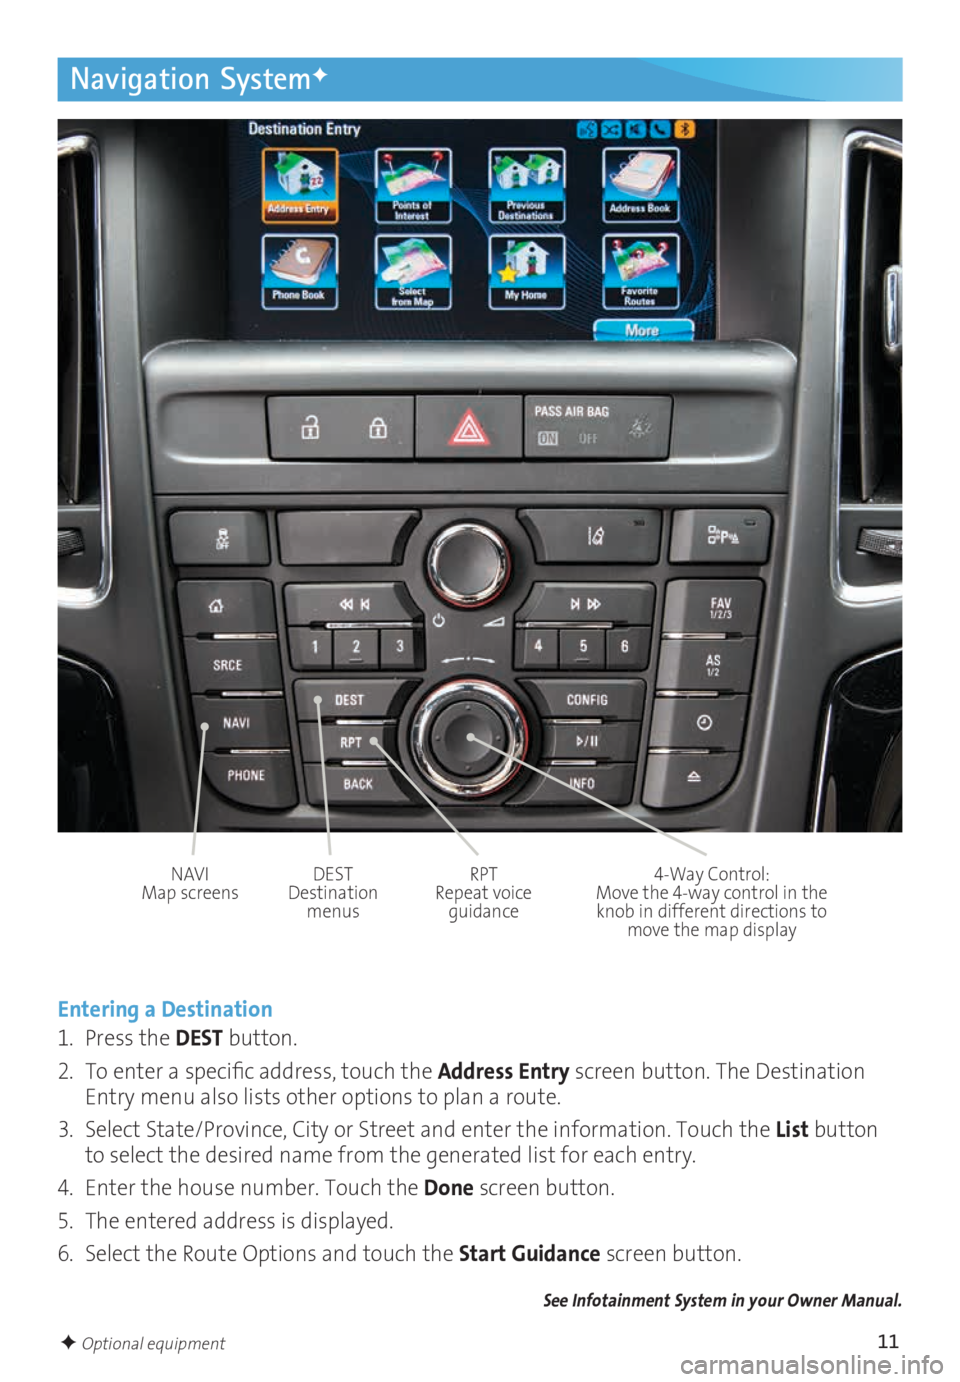 BUICK CASCADA 2016  Get To Know Guide 11
Navigation SystemF
Entering a Destination
1. Press the  DEST button.
2.  To enter a specific address, touch the  Address Entry screen button. The Destination 
Entry menu also lists other options to